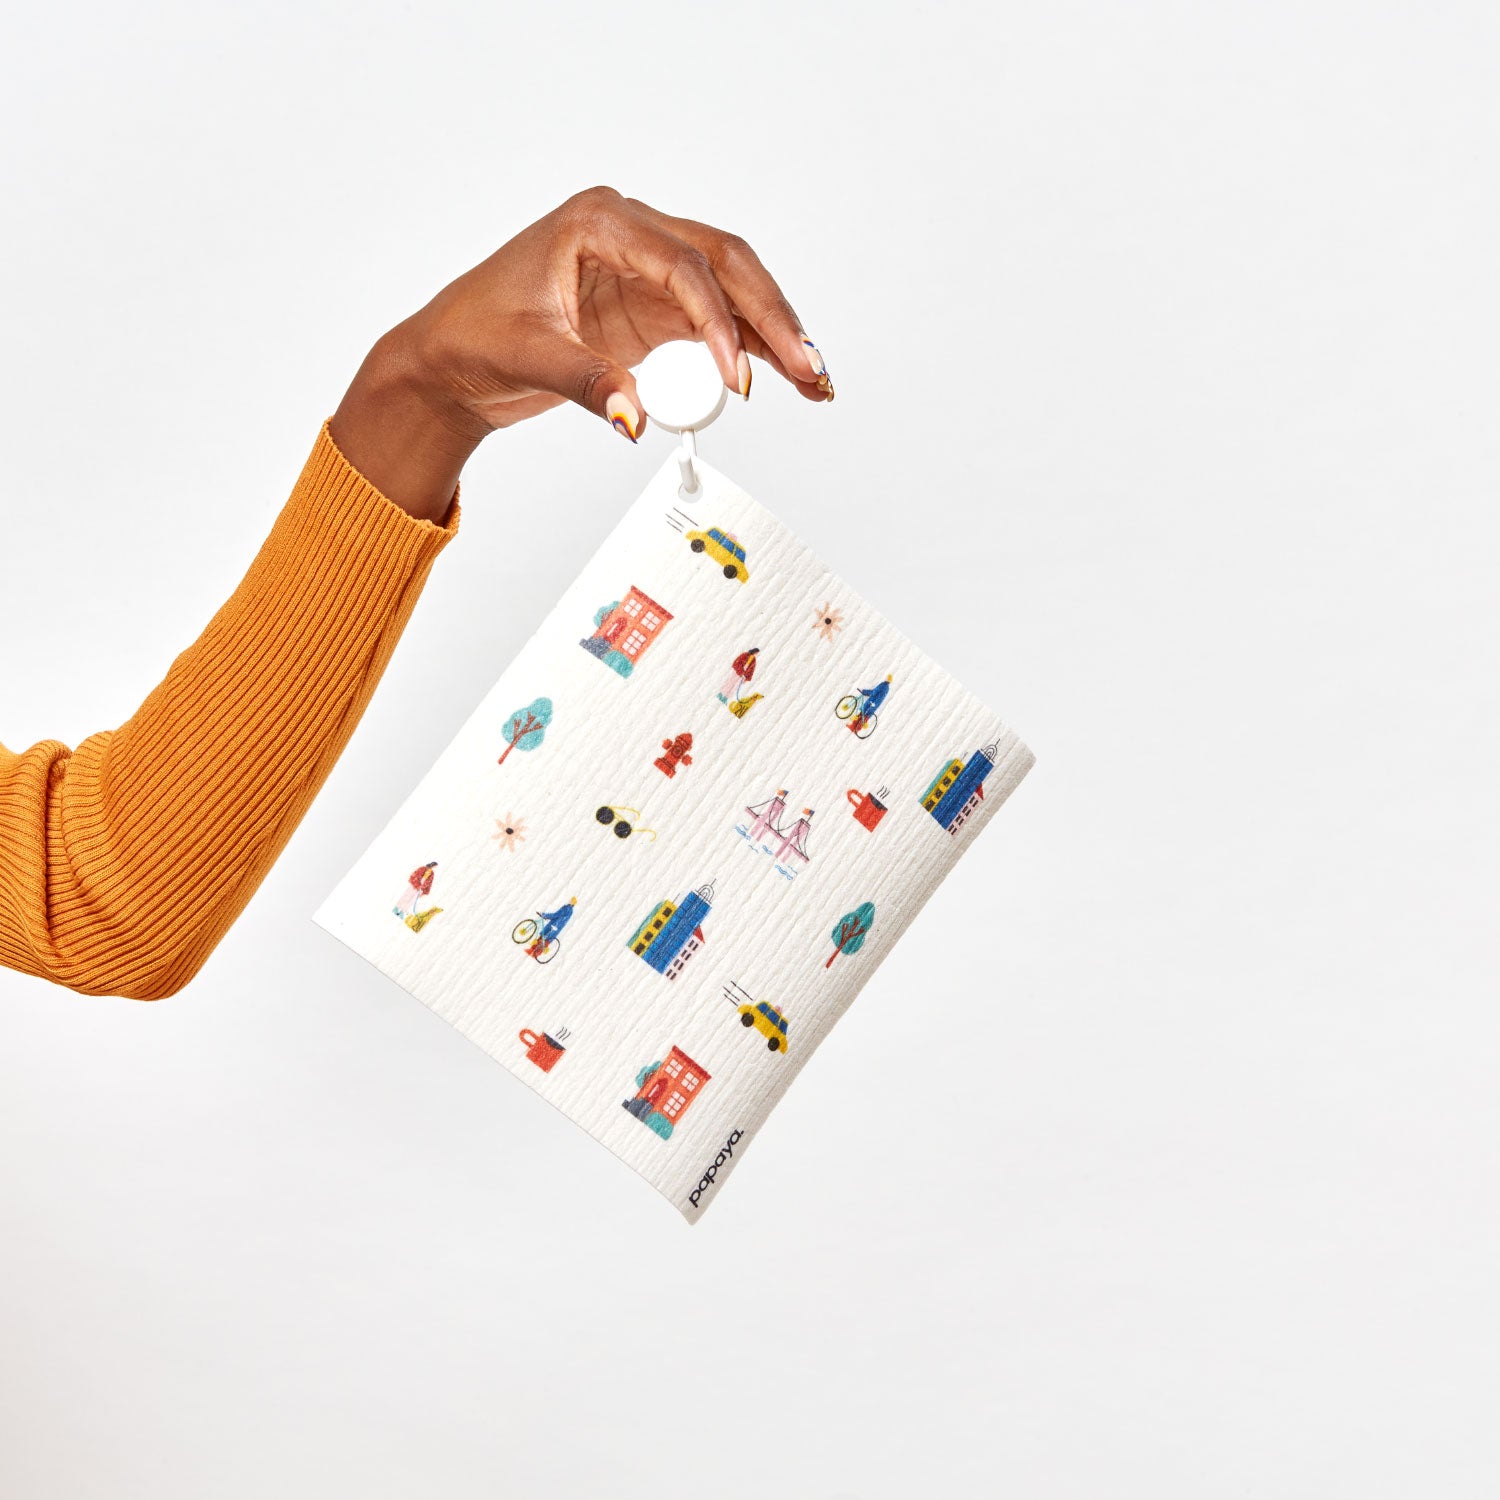 Model holding a hook with a reusable paper towel hanging on it with a city pattern design